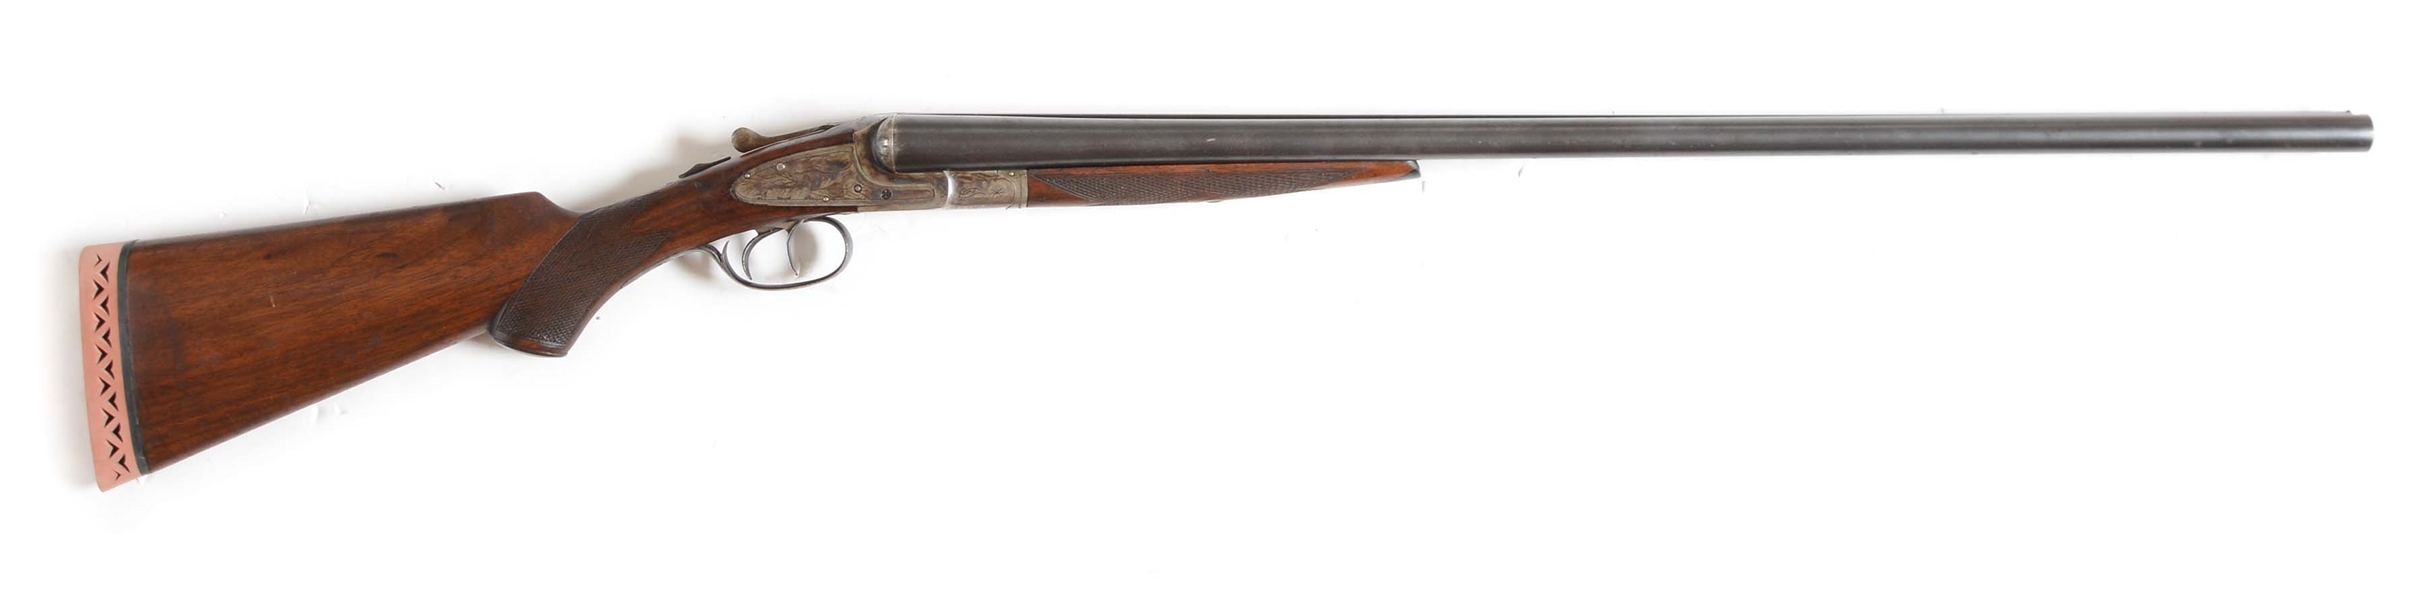 (C) L. C. SMITH IDEAL GRADE SIDE BY SIDE SHOTGUN IN 12 BORE.  